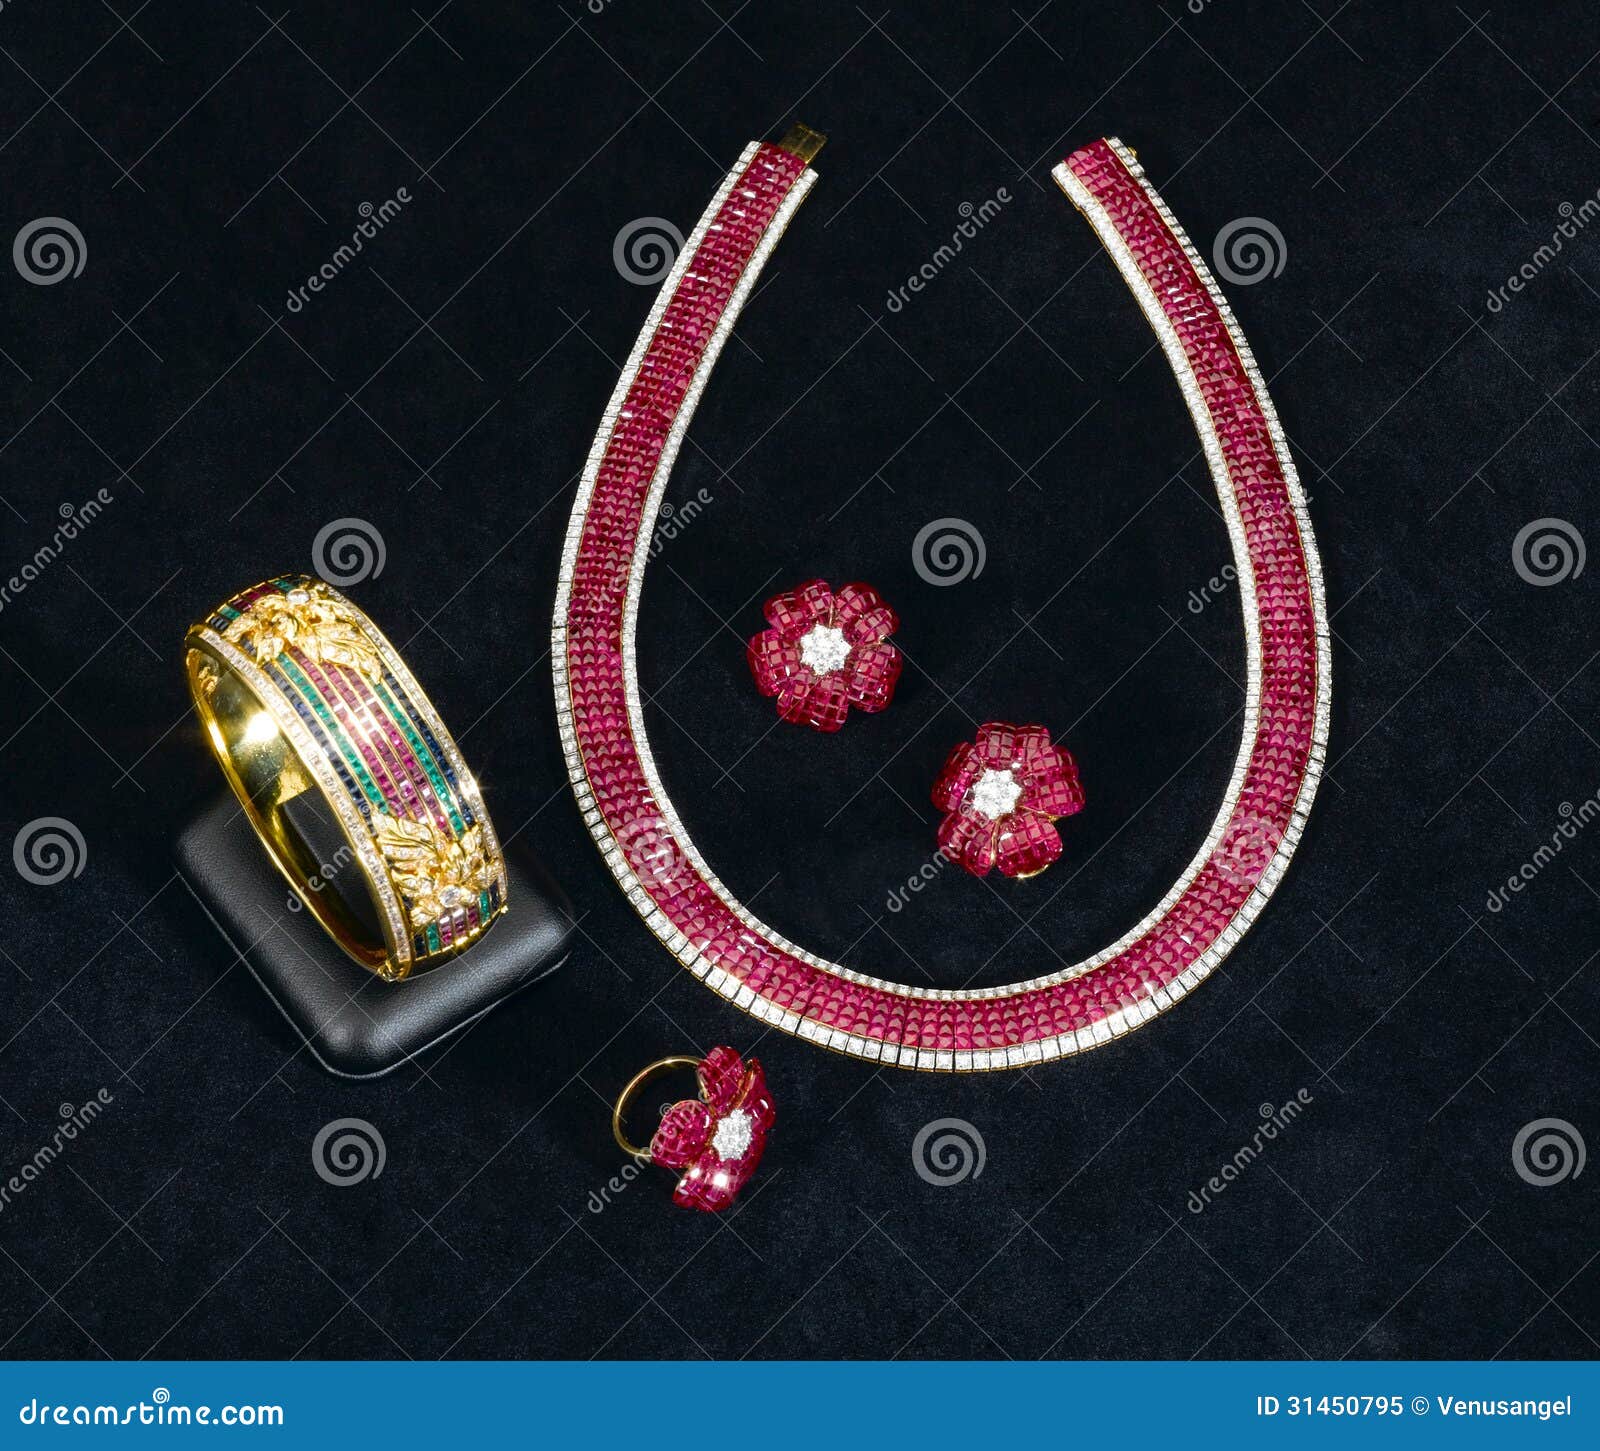 the siam ruby bracelet, necklace, ring and earring